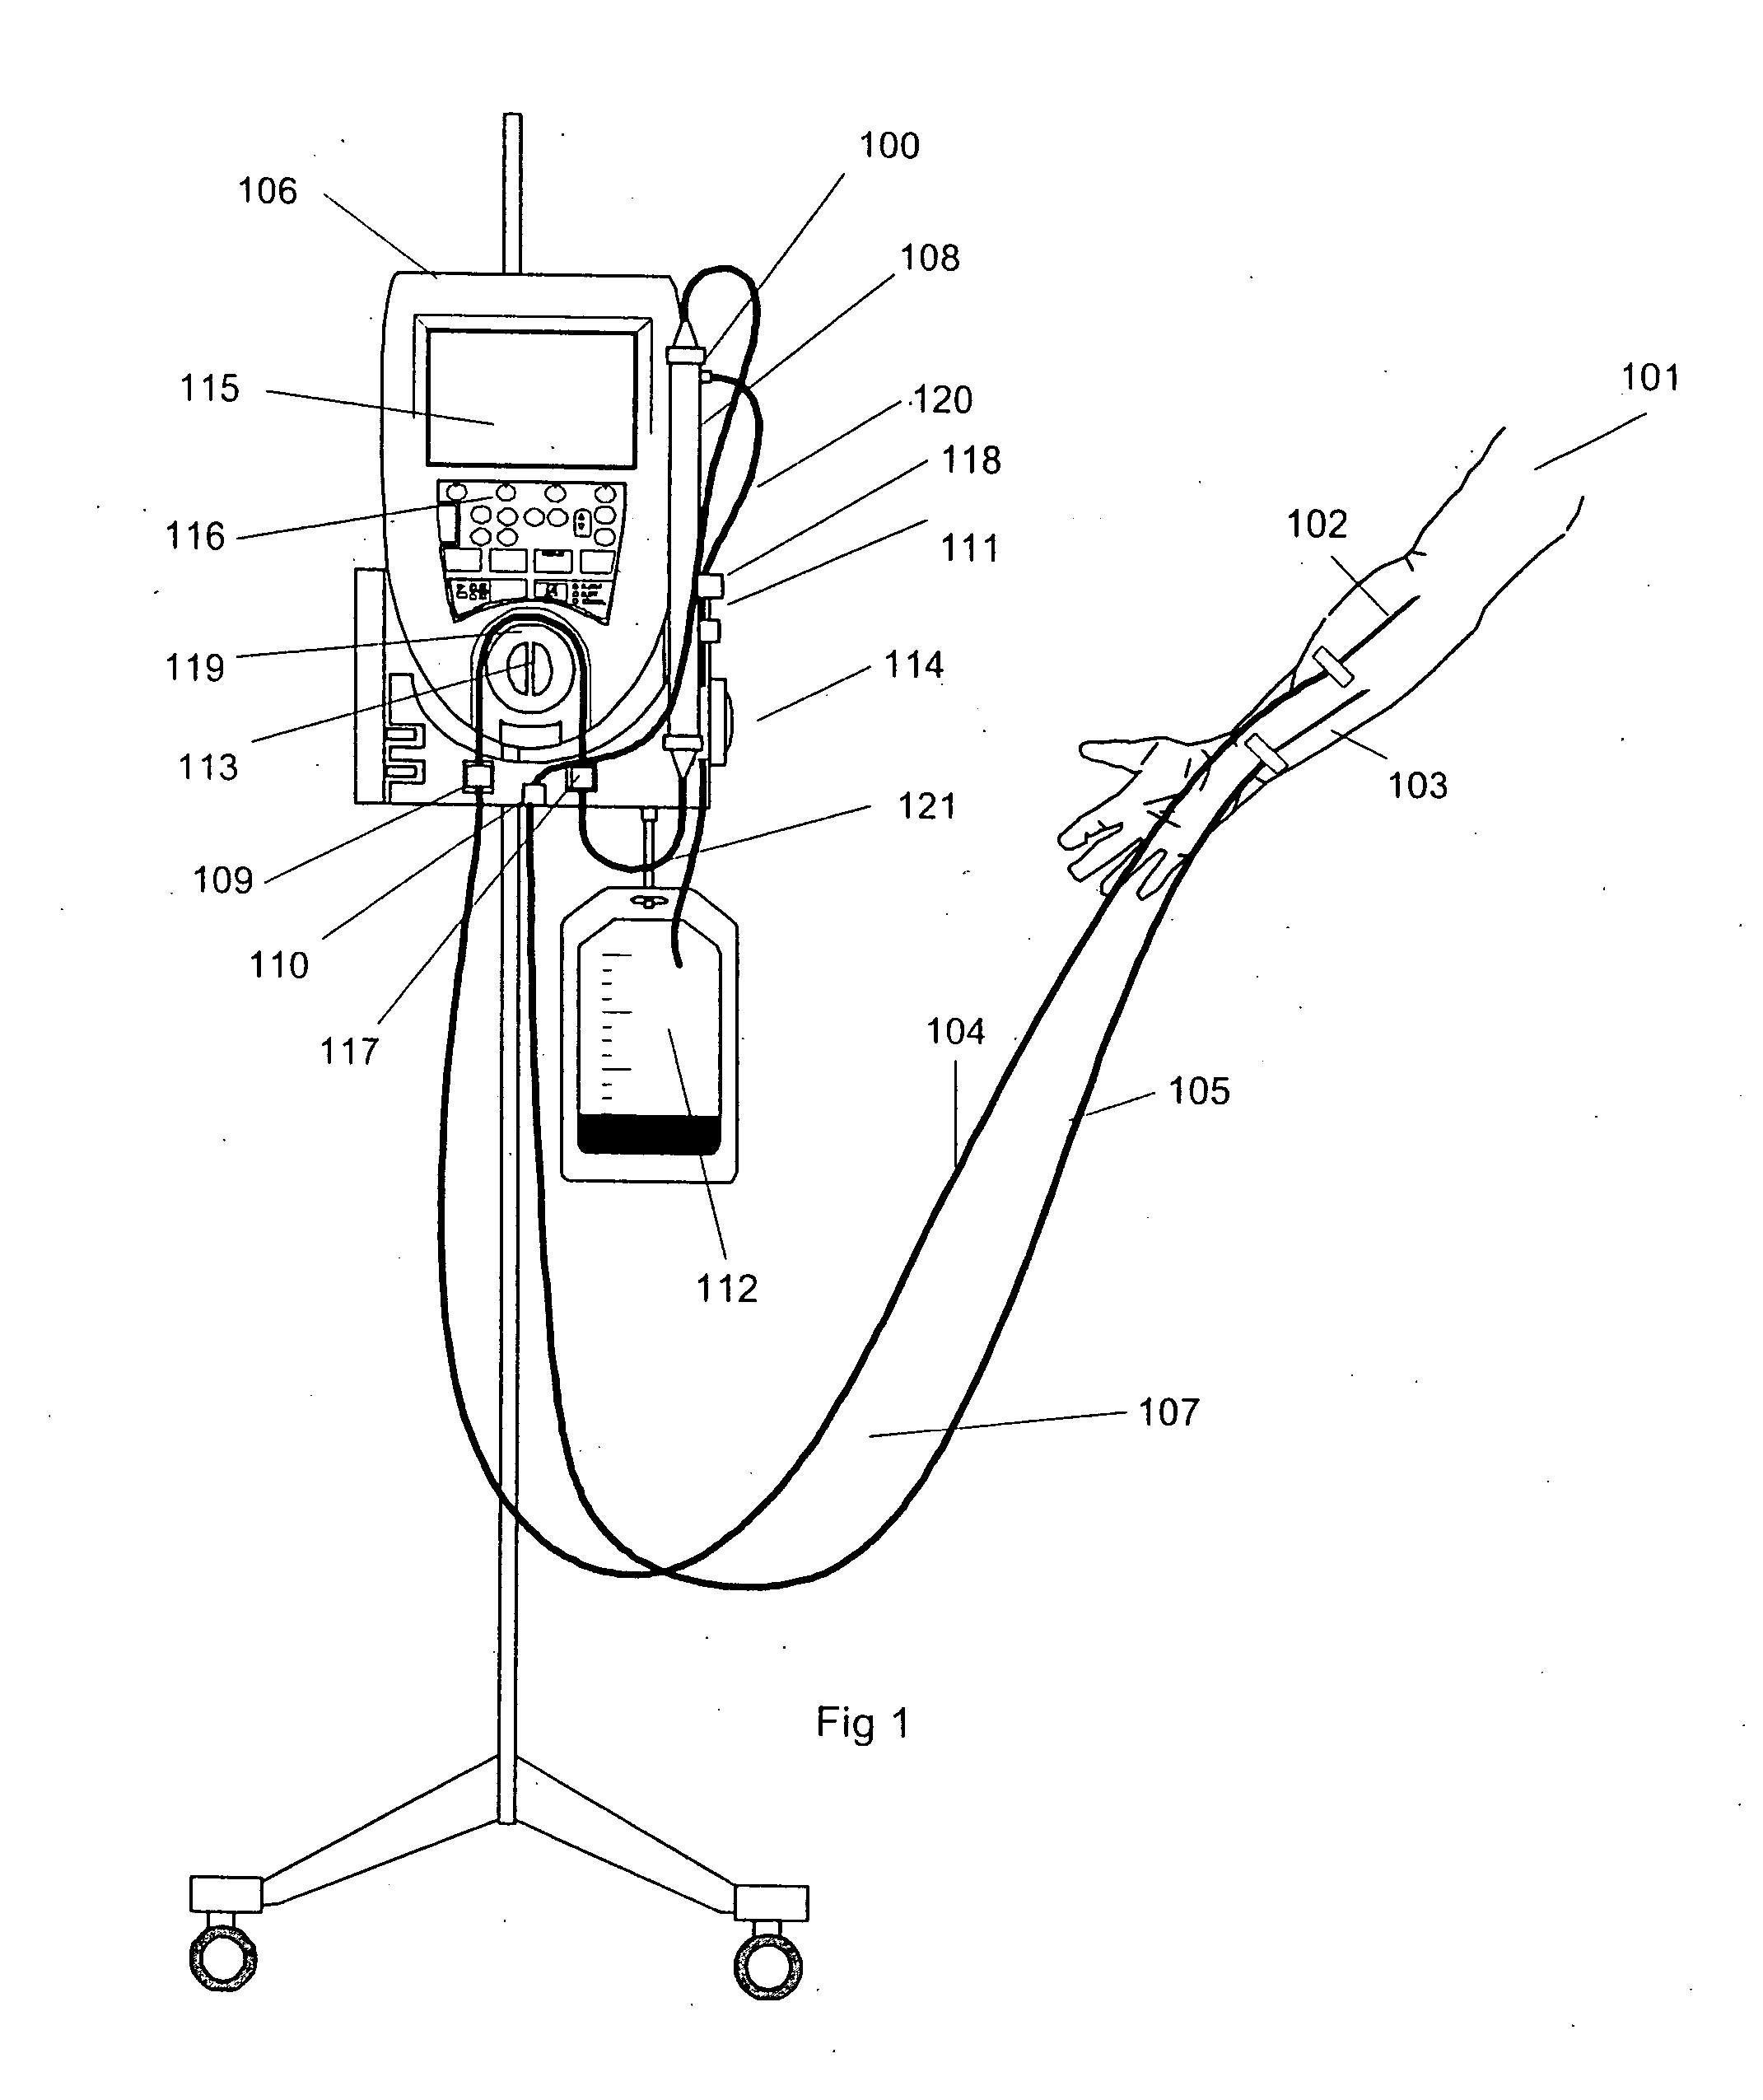 Method to control blood and filtrate flowing through an extracorporeal device